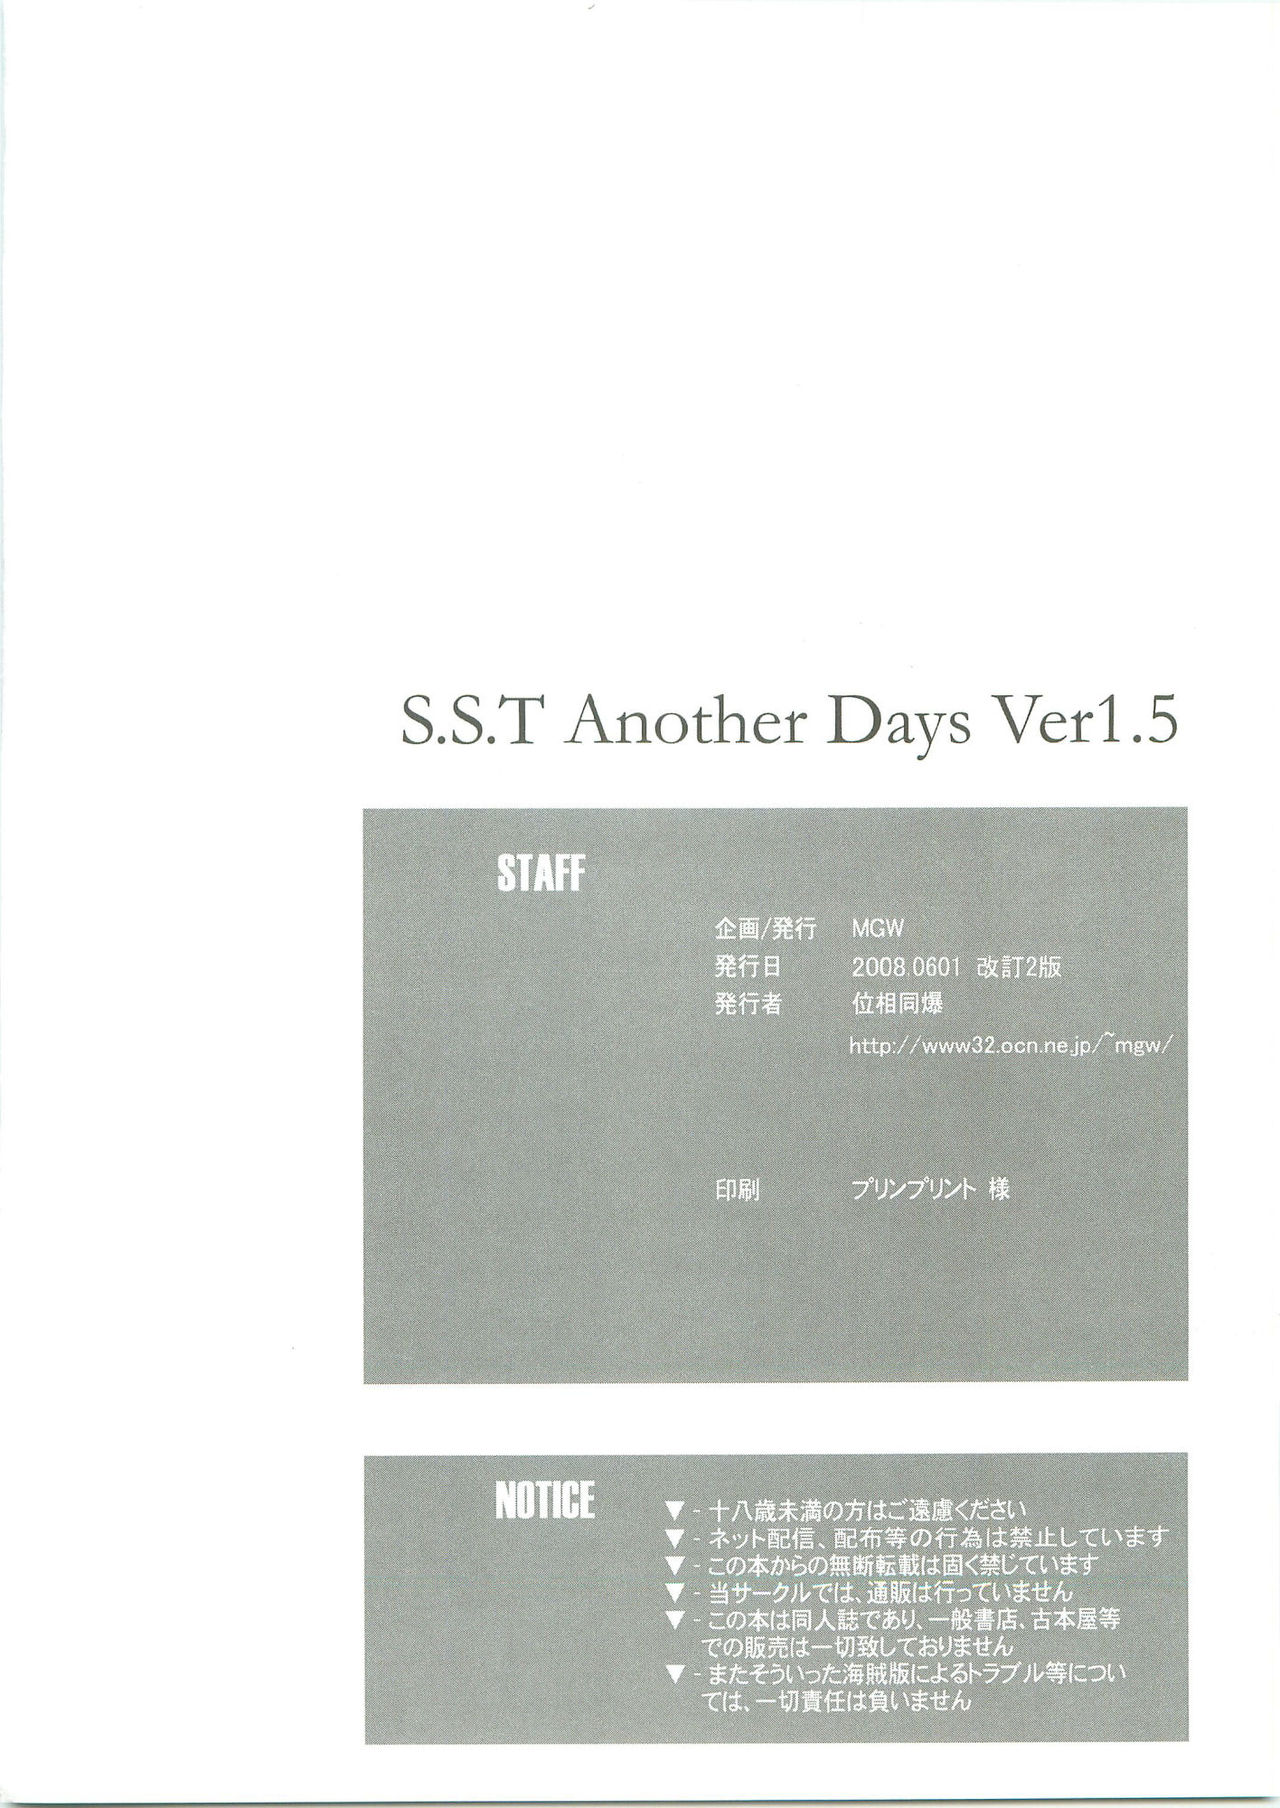 [MGW (Isou Doubaku)] S.S.T Another Days Ver1.5 (ToHeart2) (同人誌) [MGW (位相同爆)] S.S.T Another Days Ver1.5 (ToHeart2)